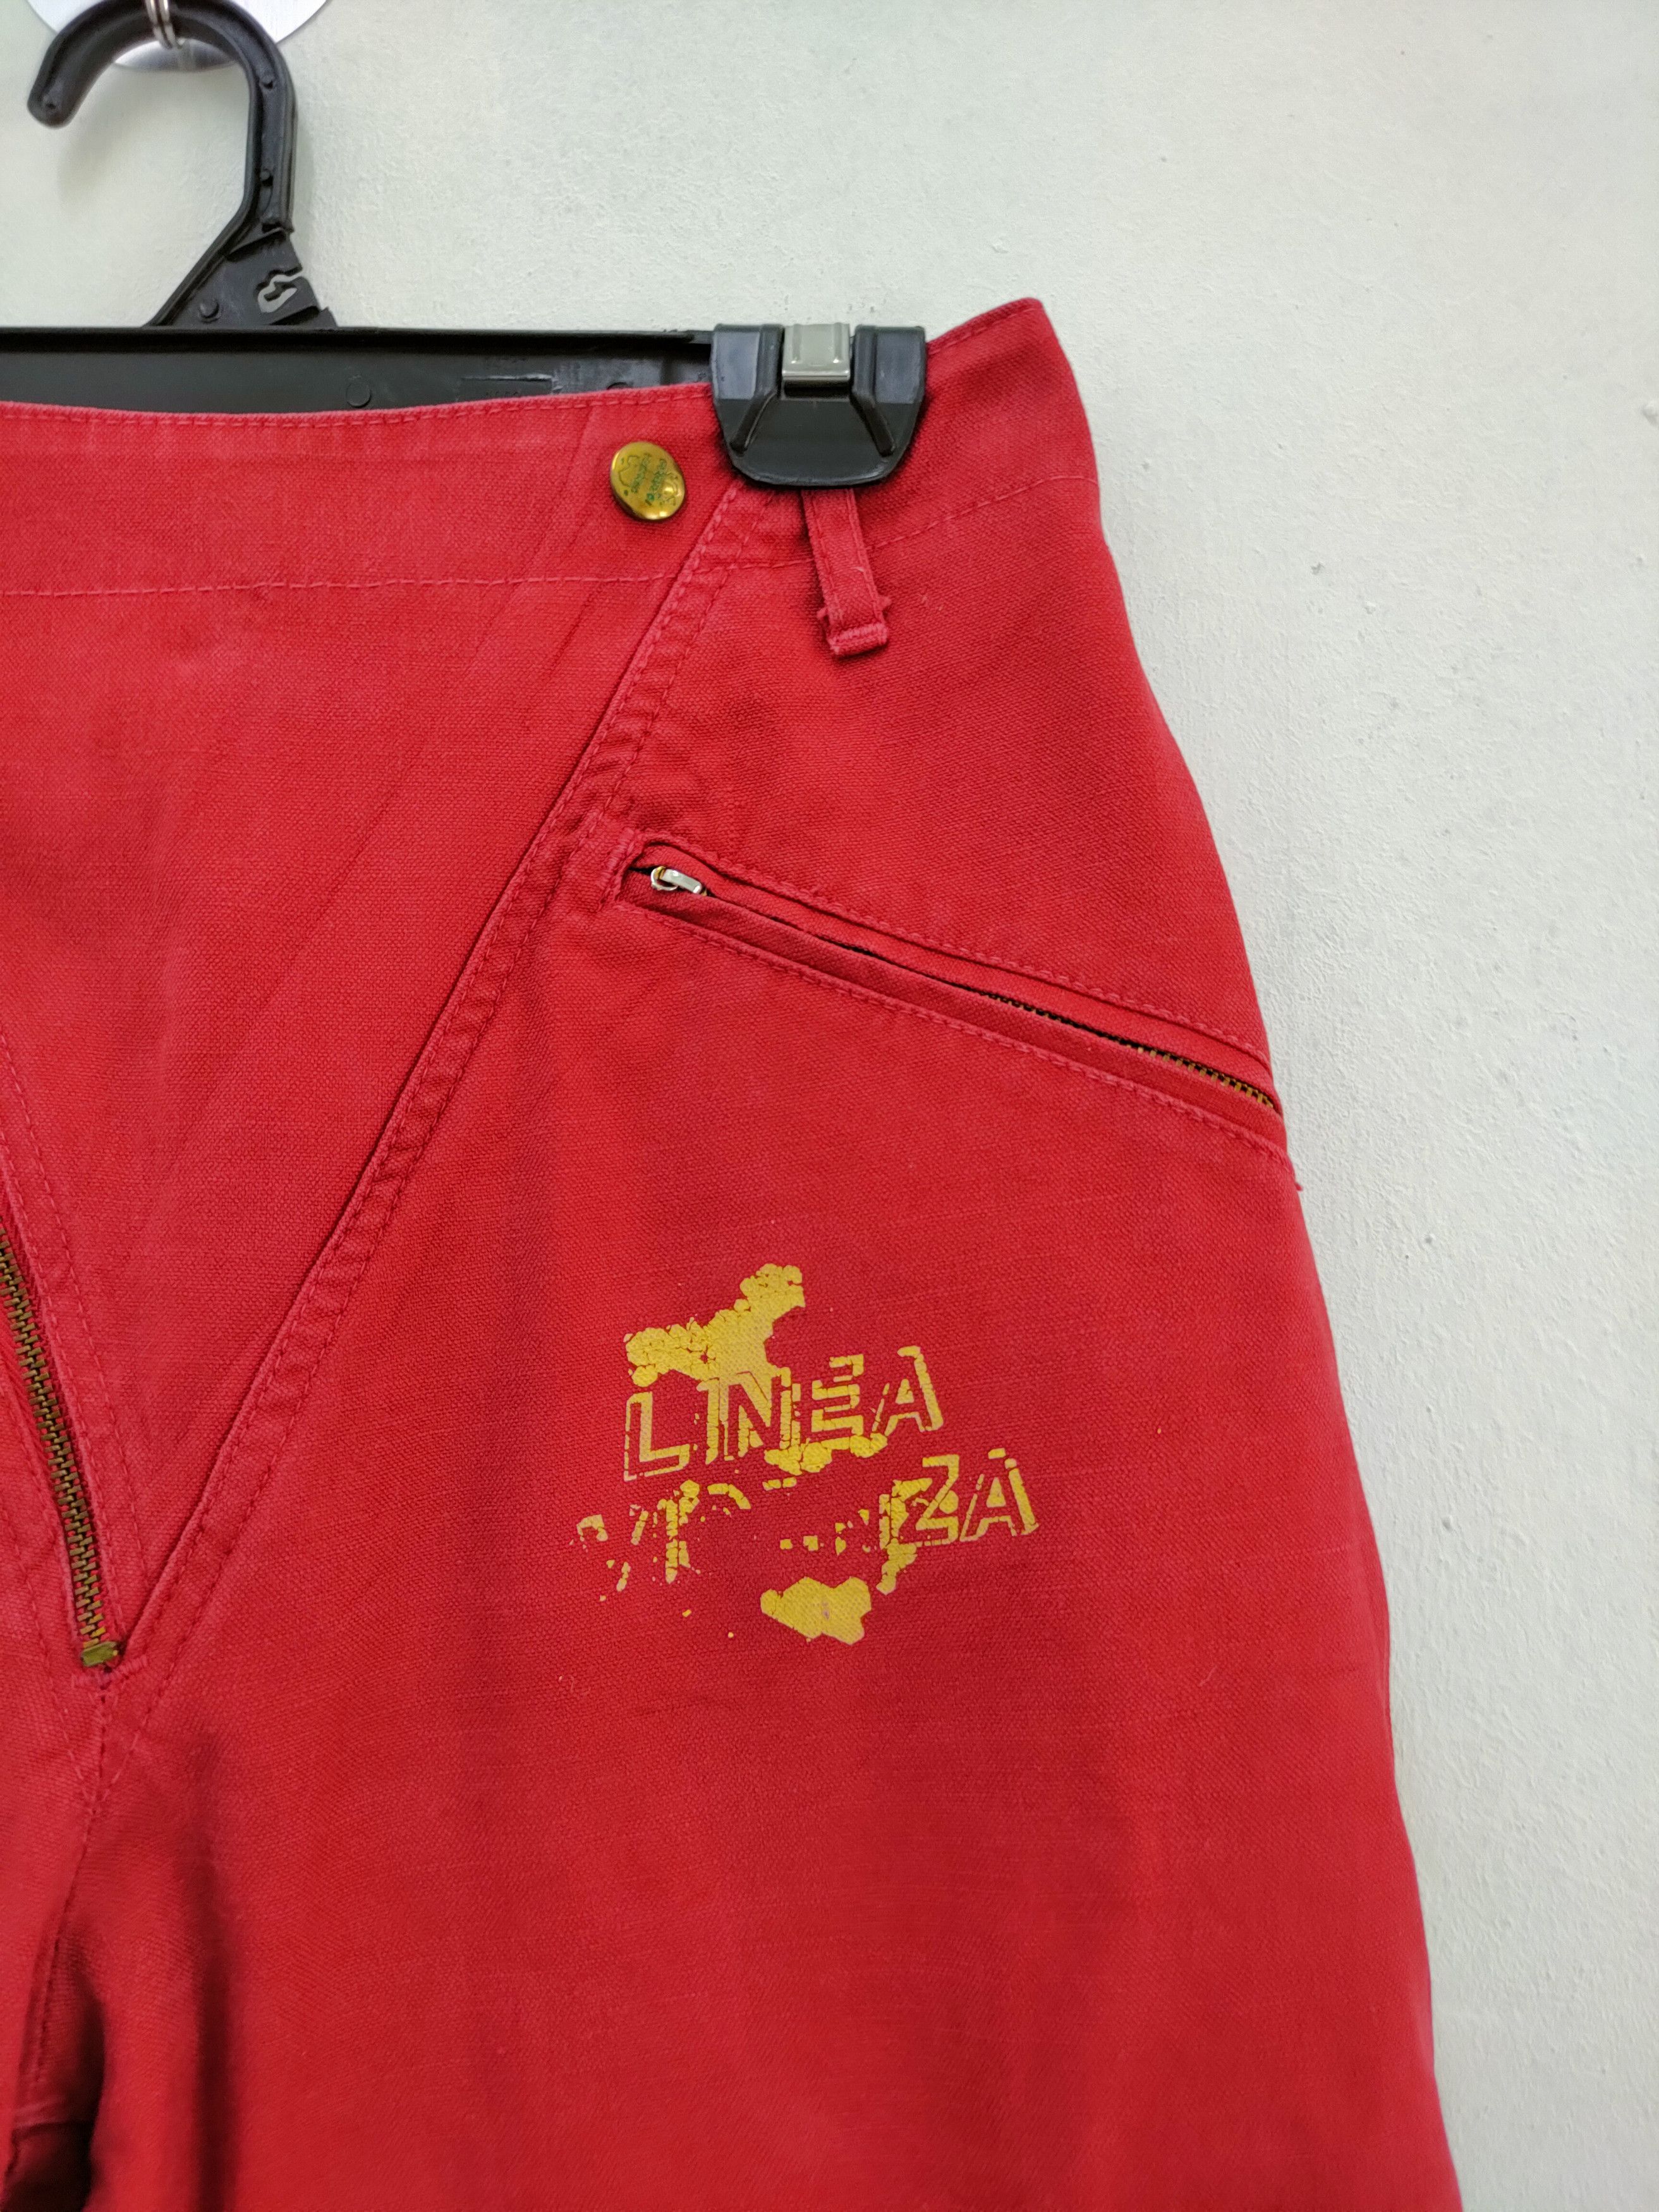 Linea Linea Vicenza Red Pants Made In Japan Size US 26 / EU 42 - 7 Thumbnail